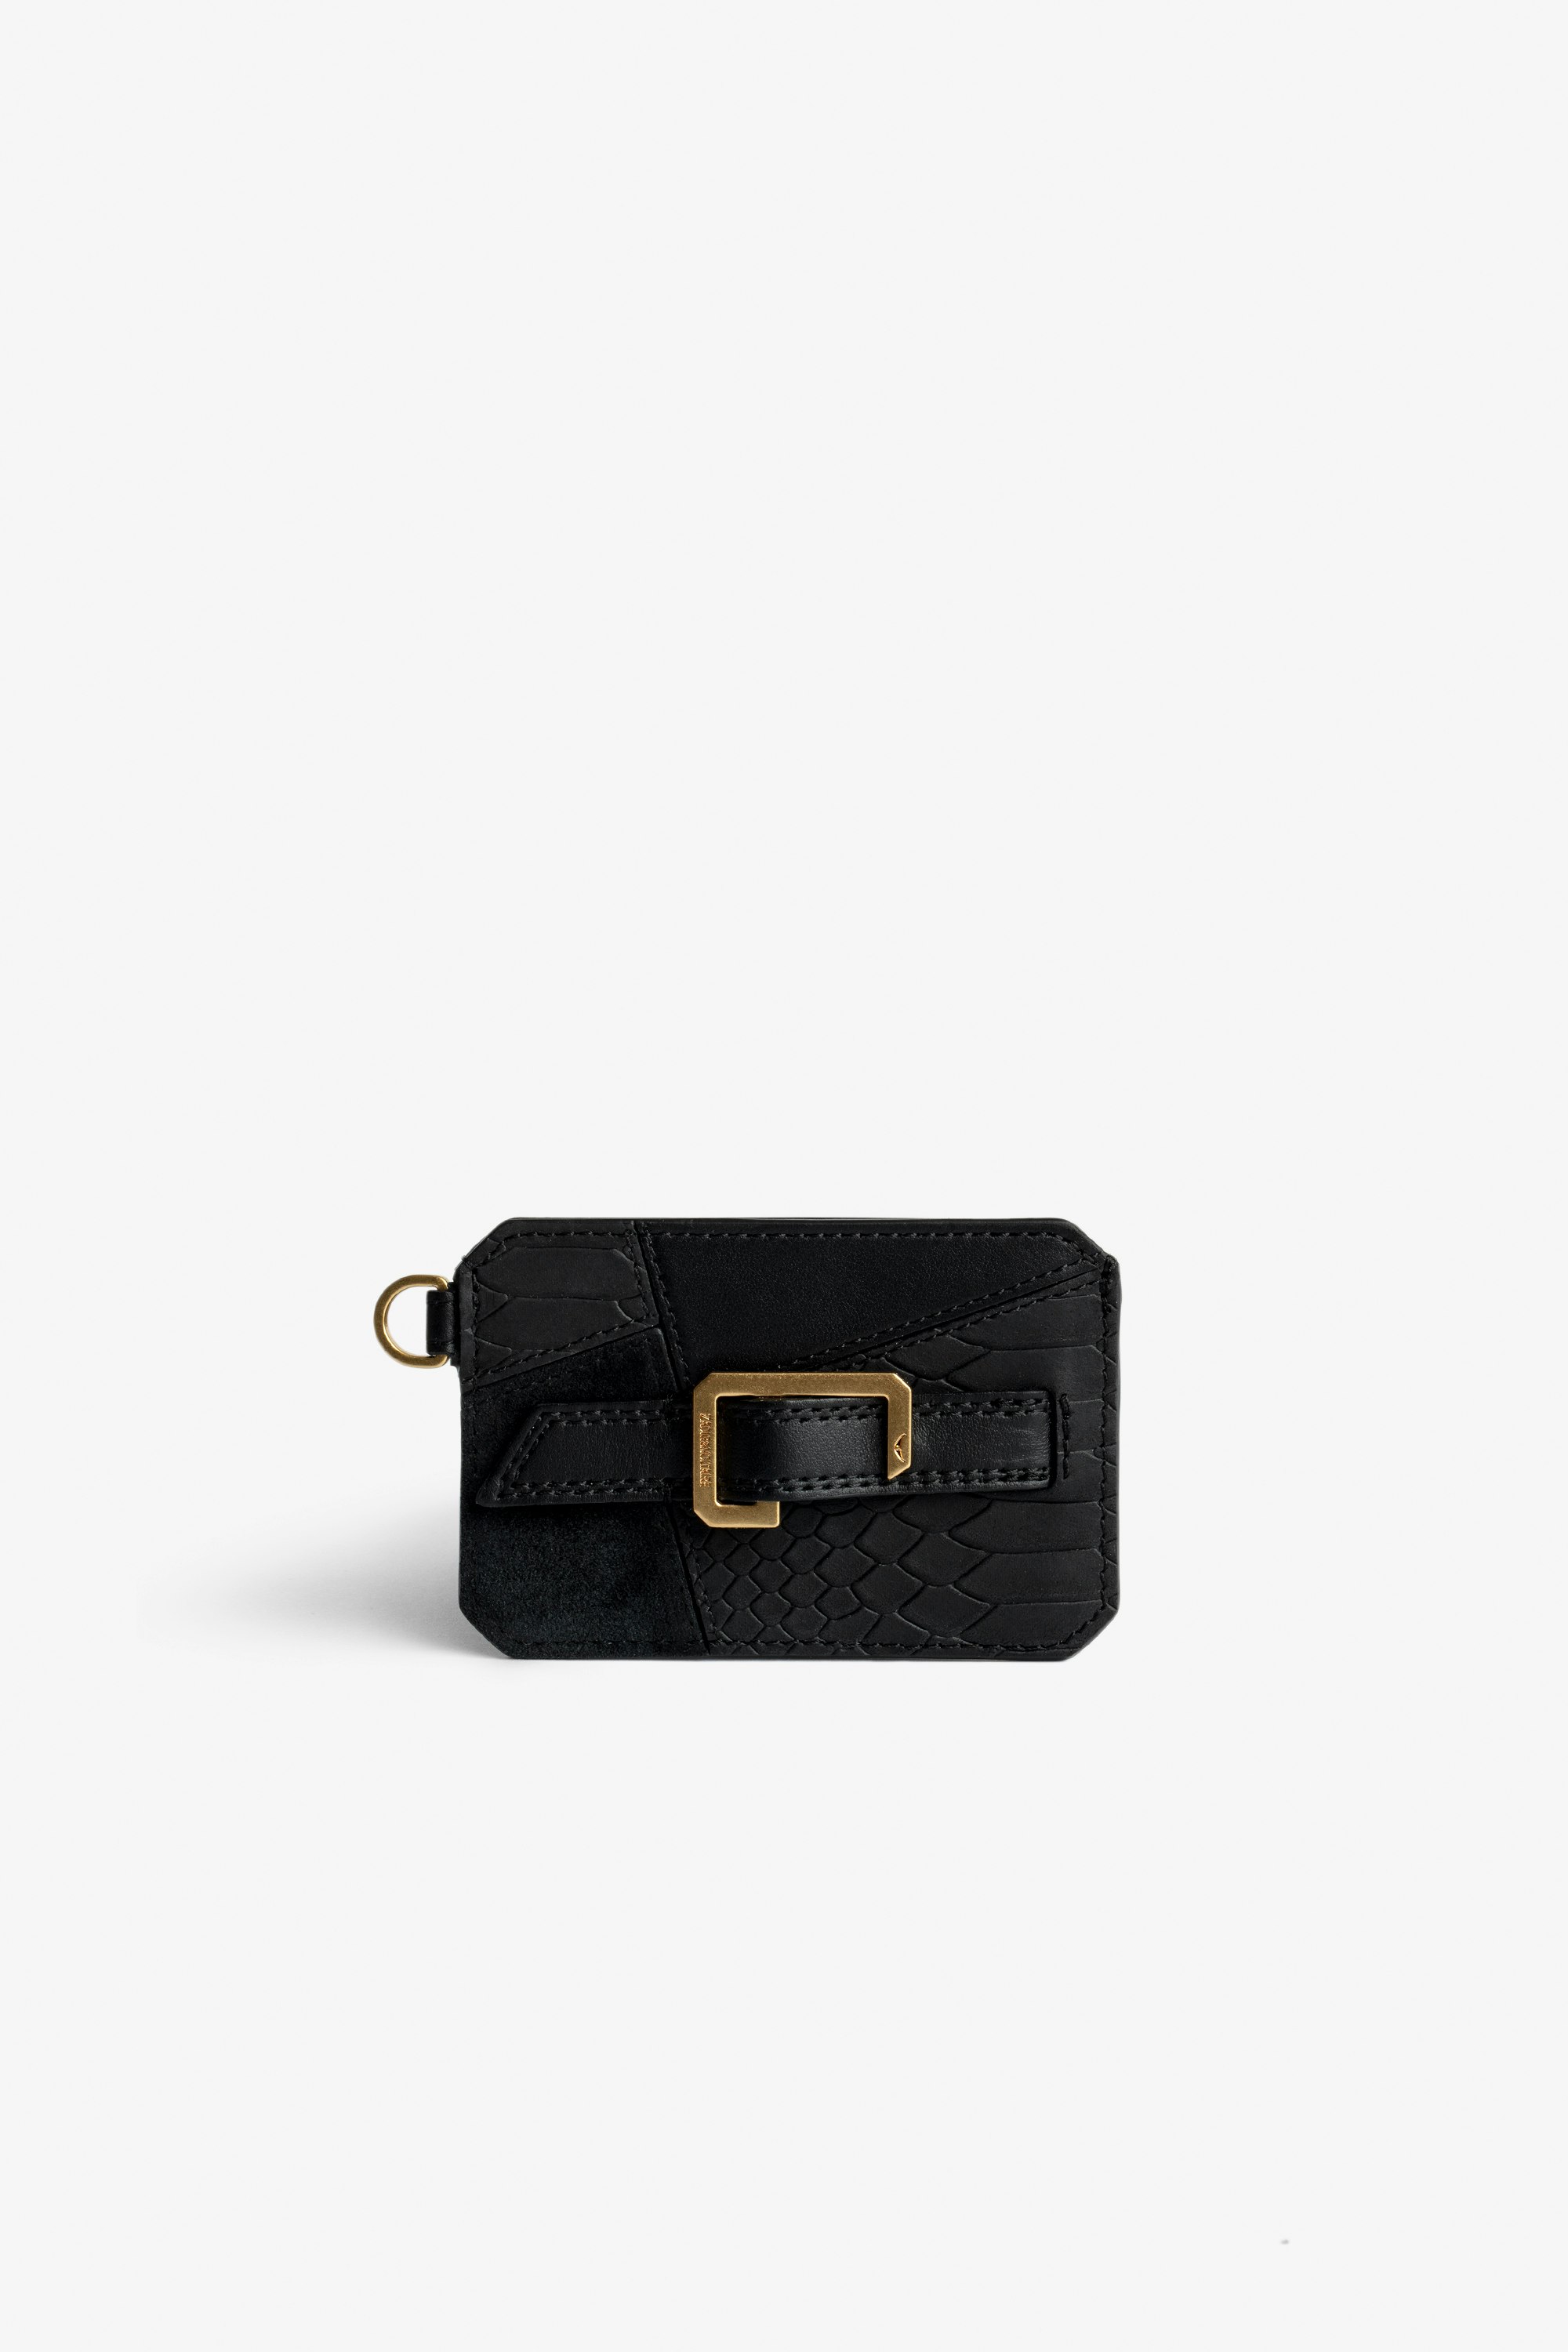 Le Cecilia Pass Card Case Women's card case in black leather patchwork with a C-shaped gold-tone buckle.